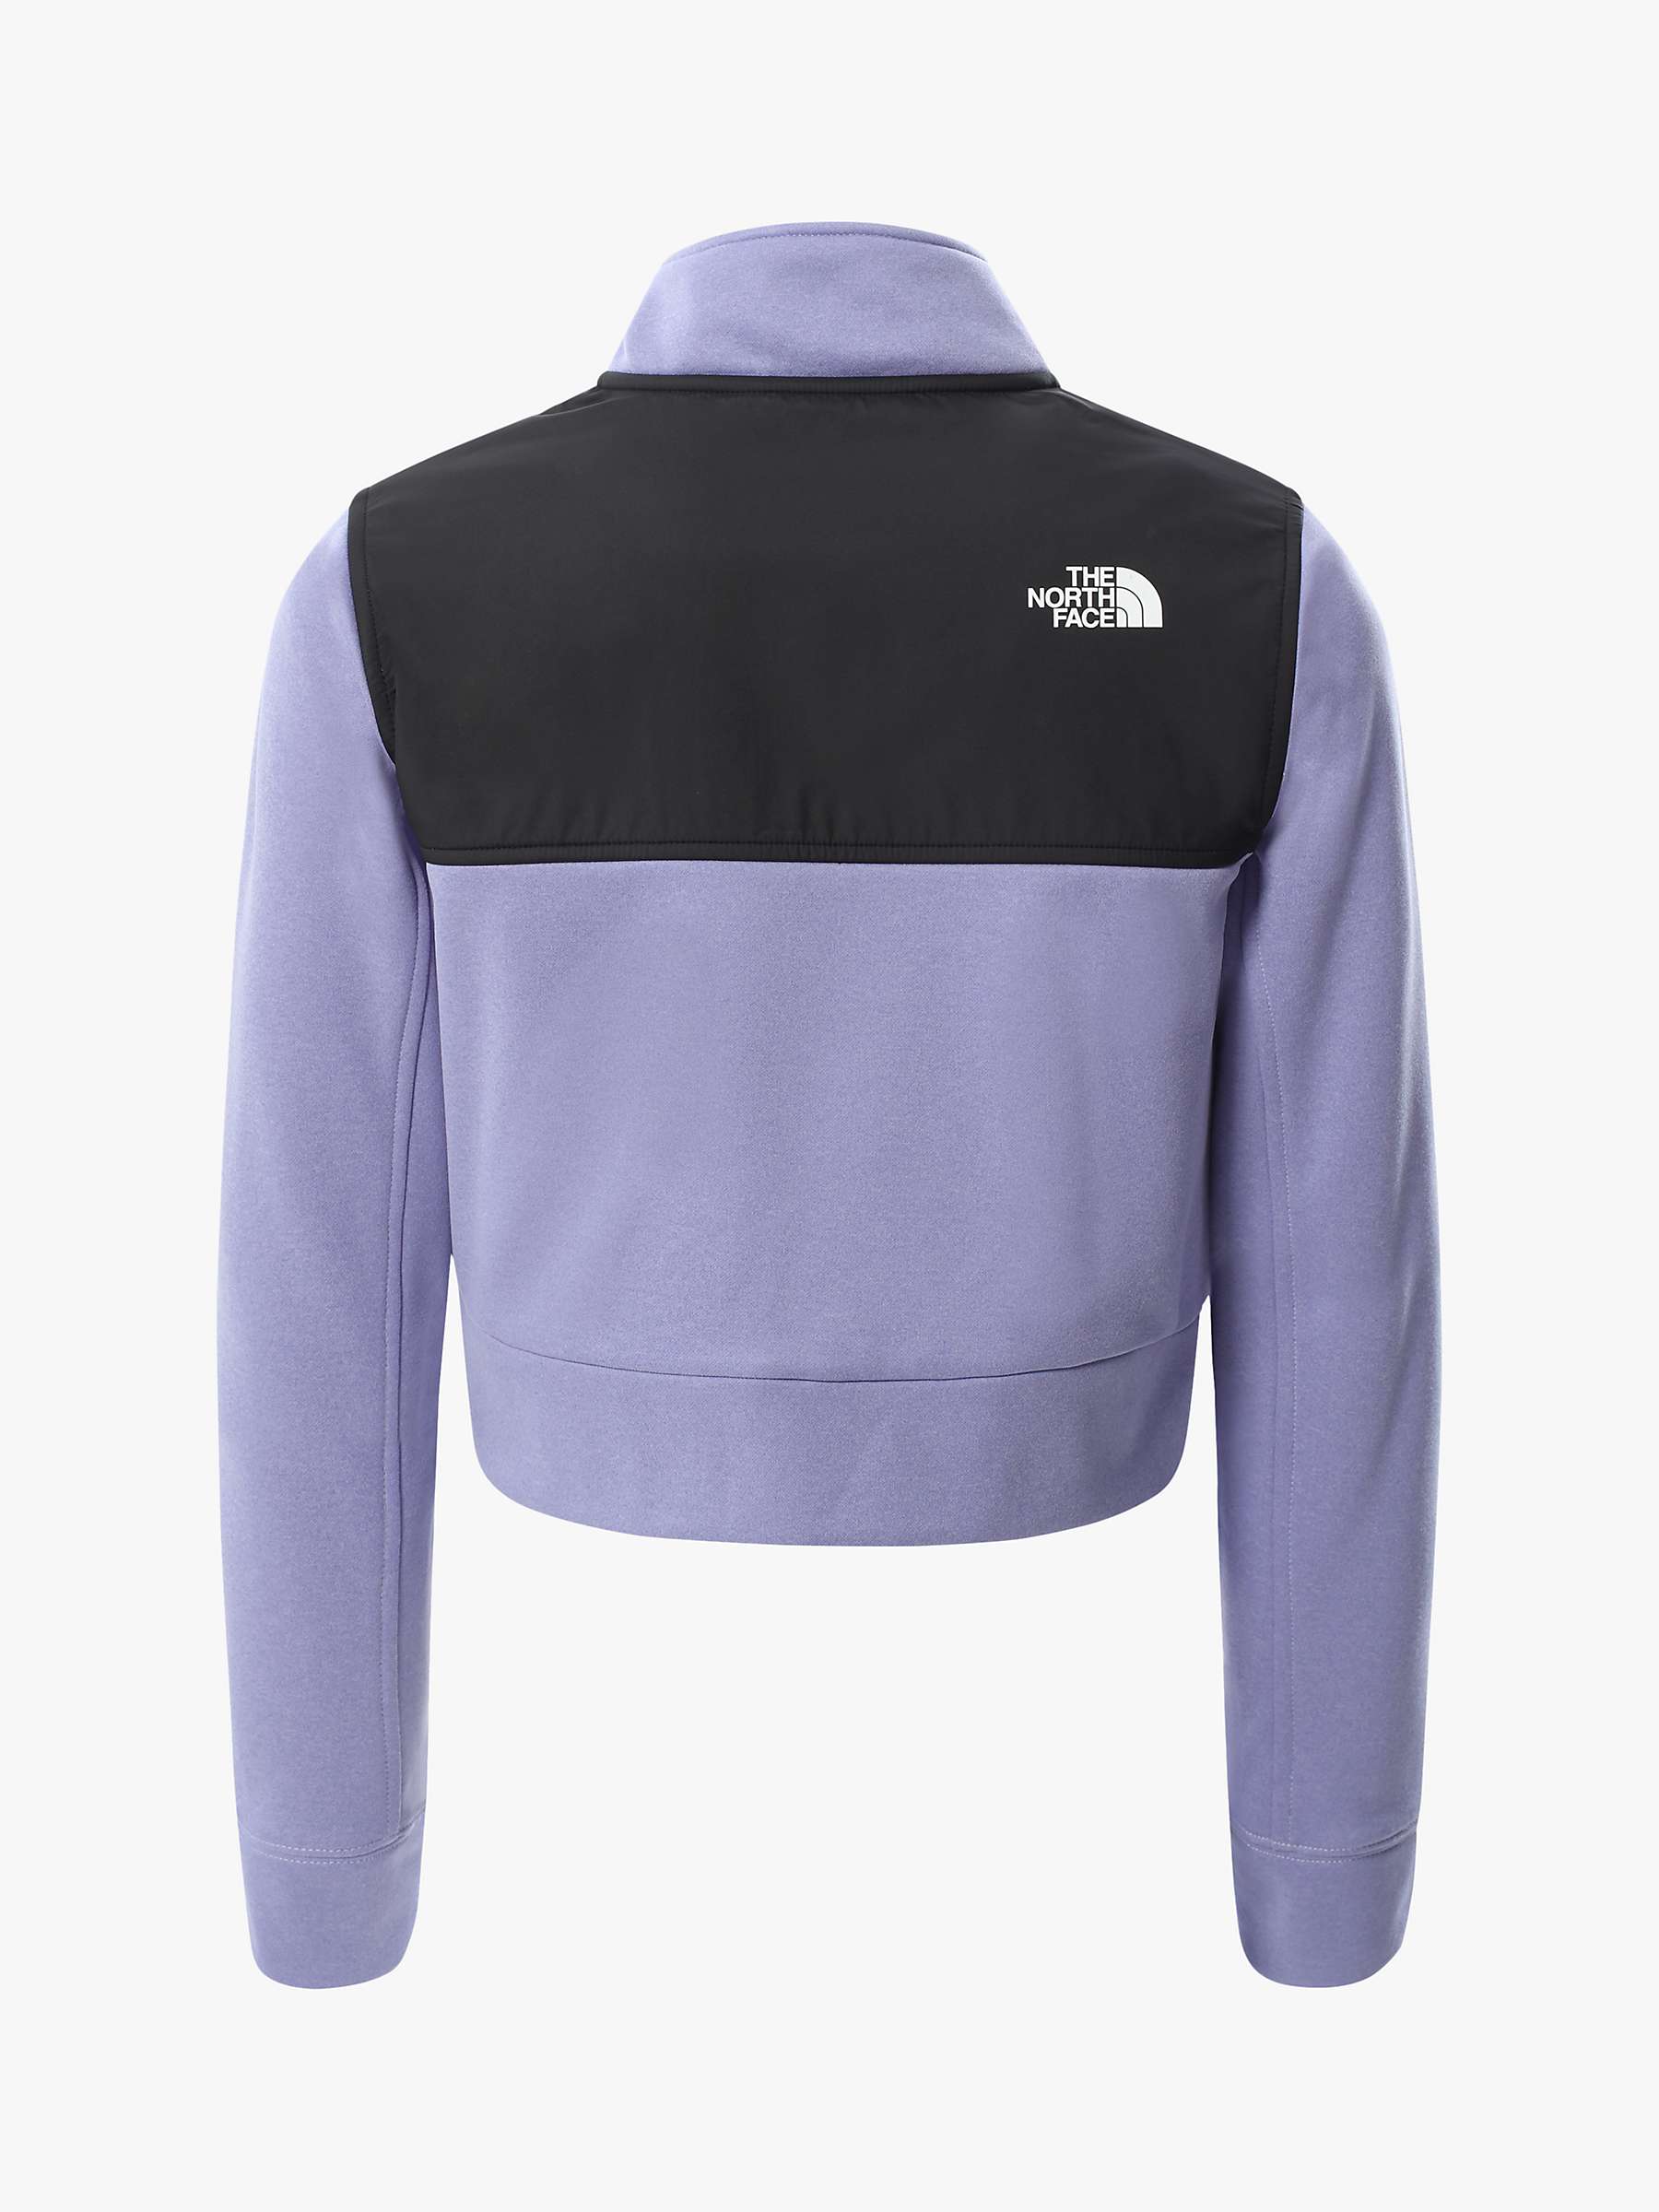 Buy The North Face Kids' Surgent Full Zip Cropped Jumper Online at johnlewis.com